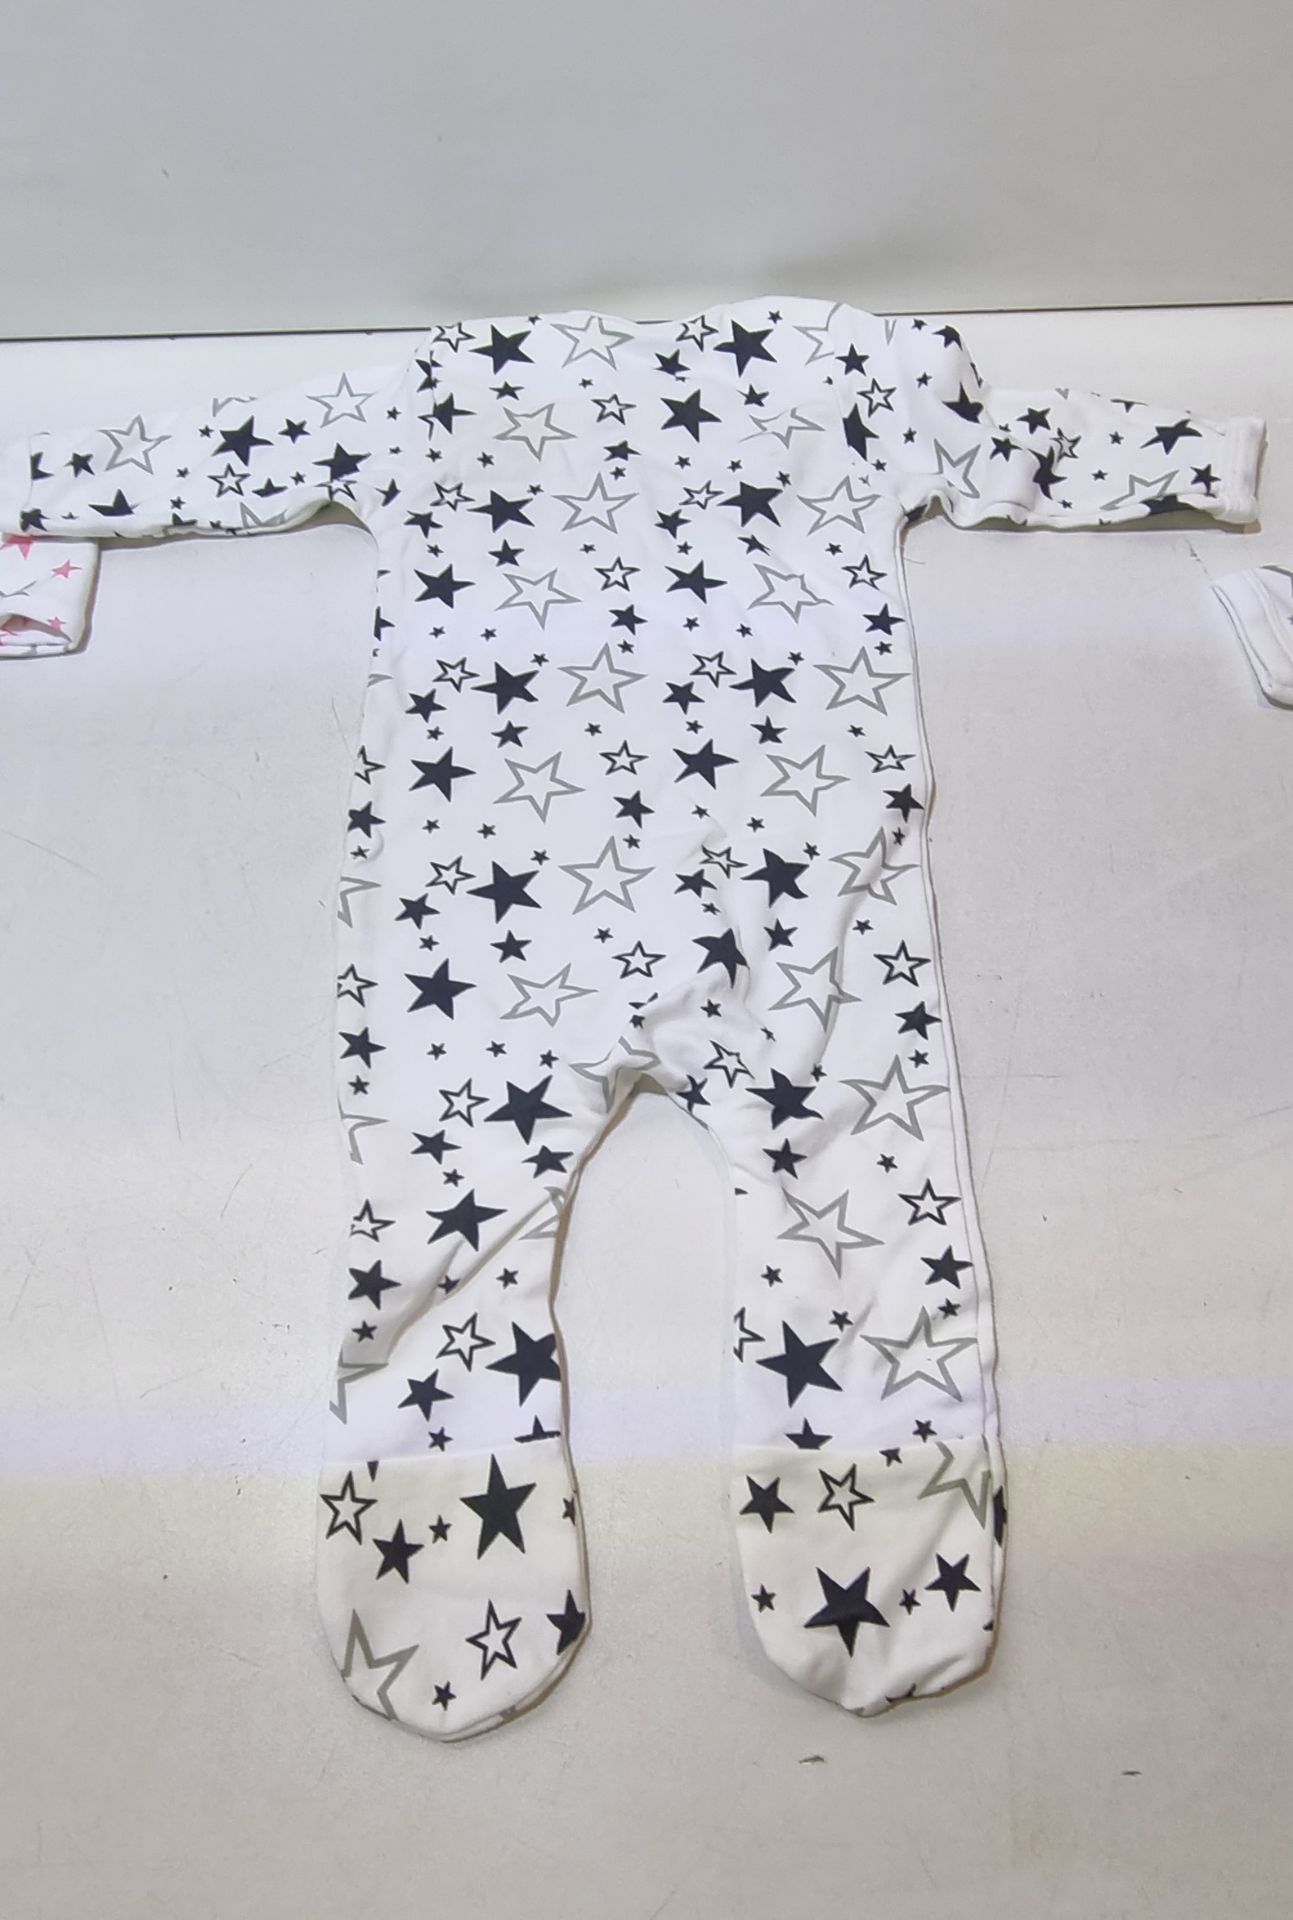 4 x Dinosaur/Star Babygrows in Various Colours & Sizes - Image 8 of 8